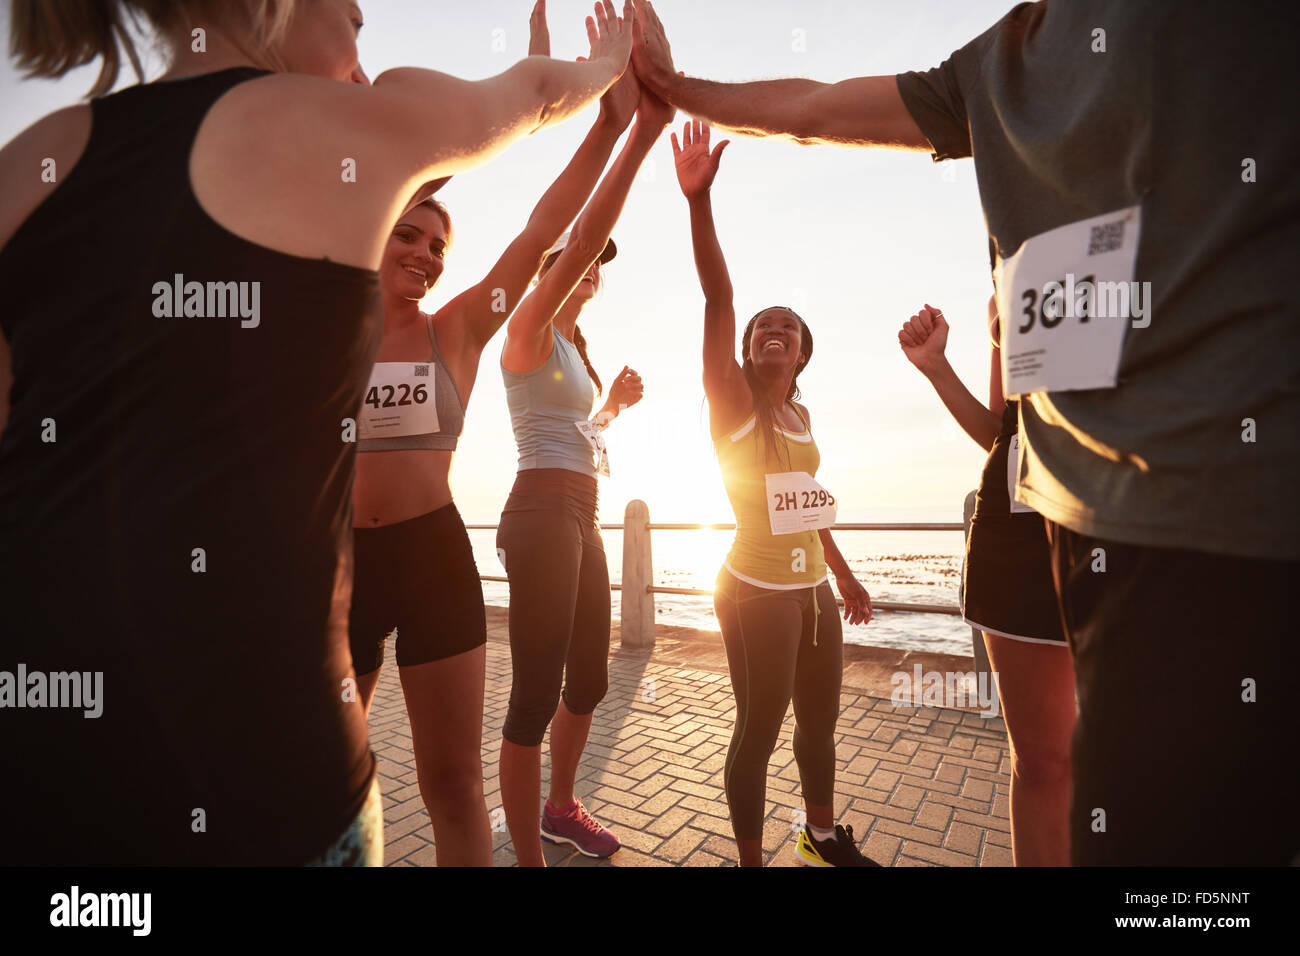 Shot of male and female runners high fiving each other after a race. Diverse group of athletes giving each other high five after Stock Photo